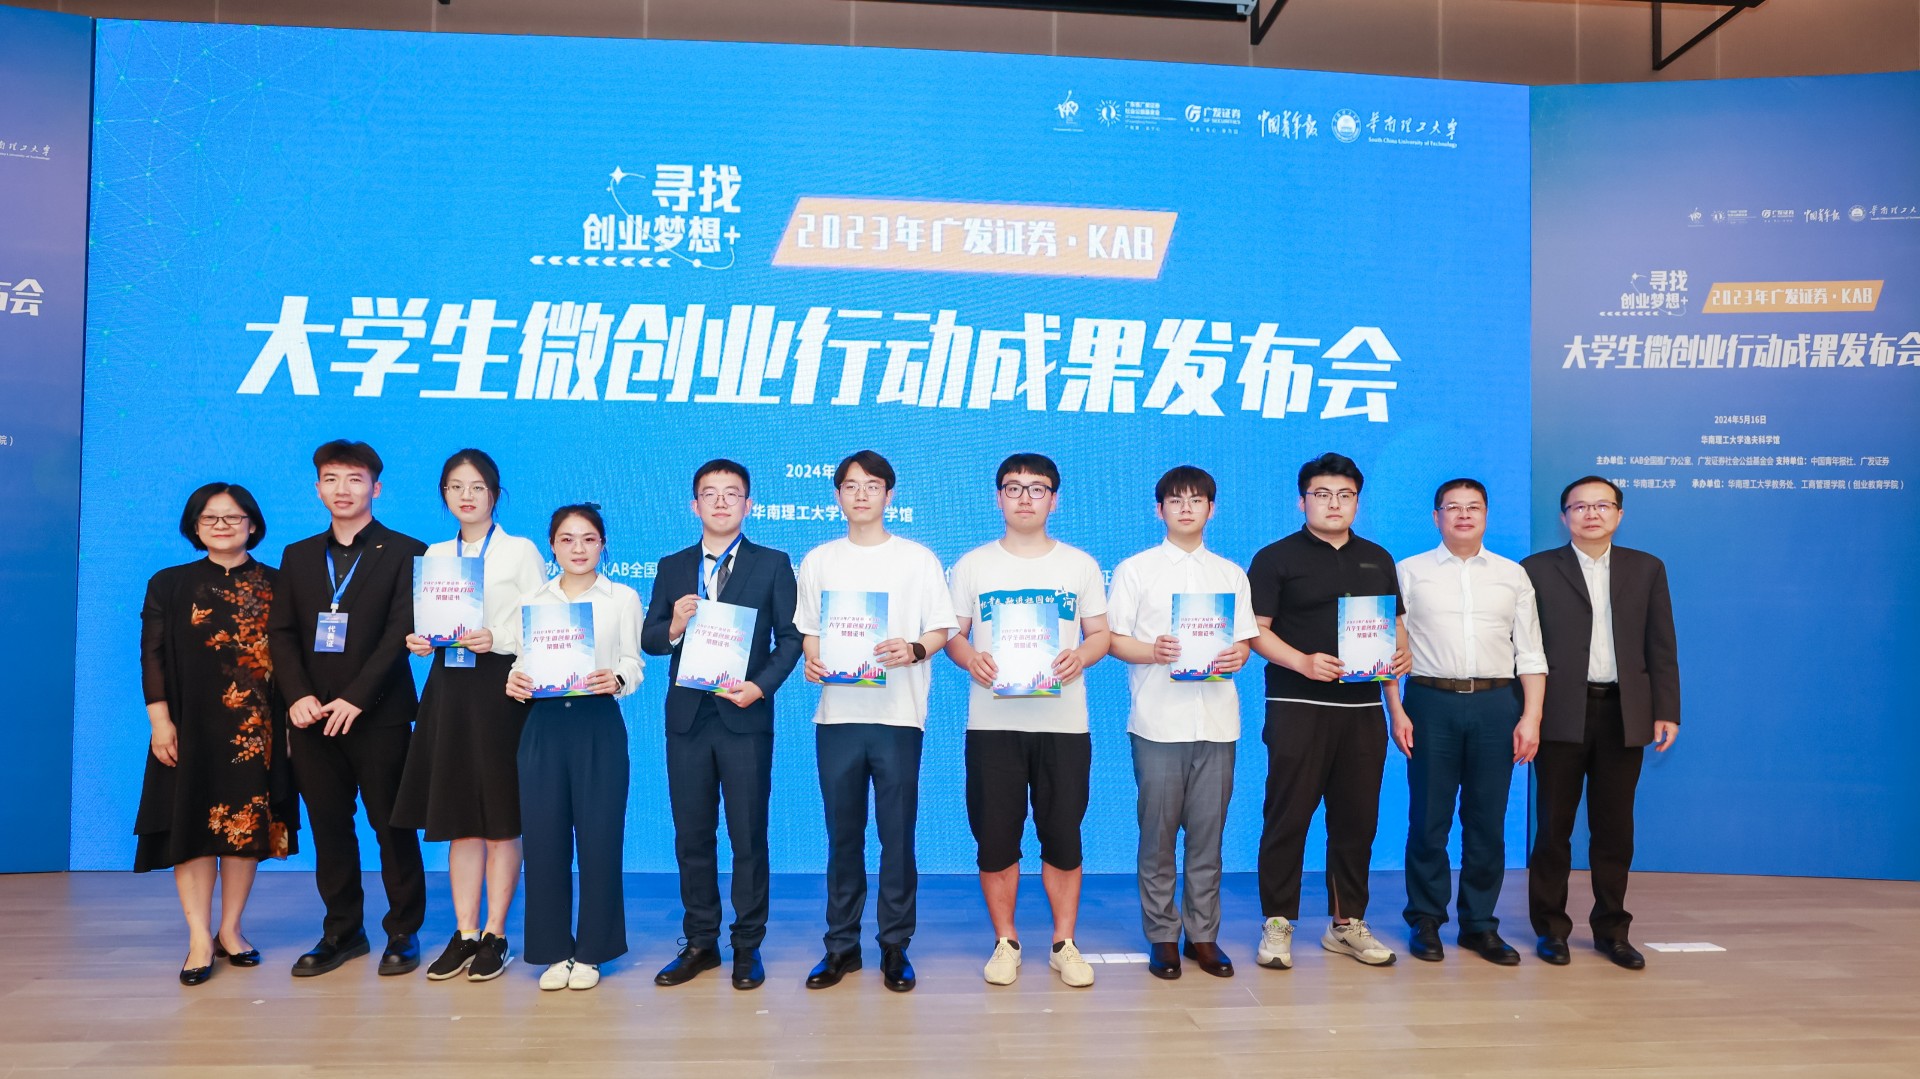 4 student startups from Guangdong to get funded by GF Securities & KAB